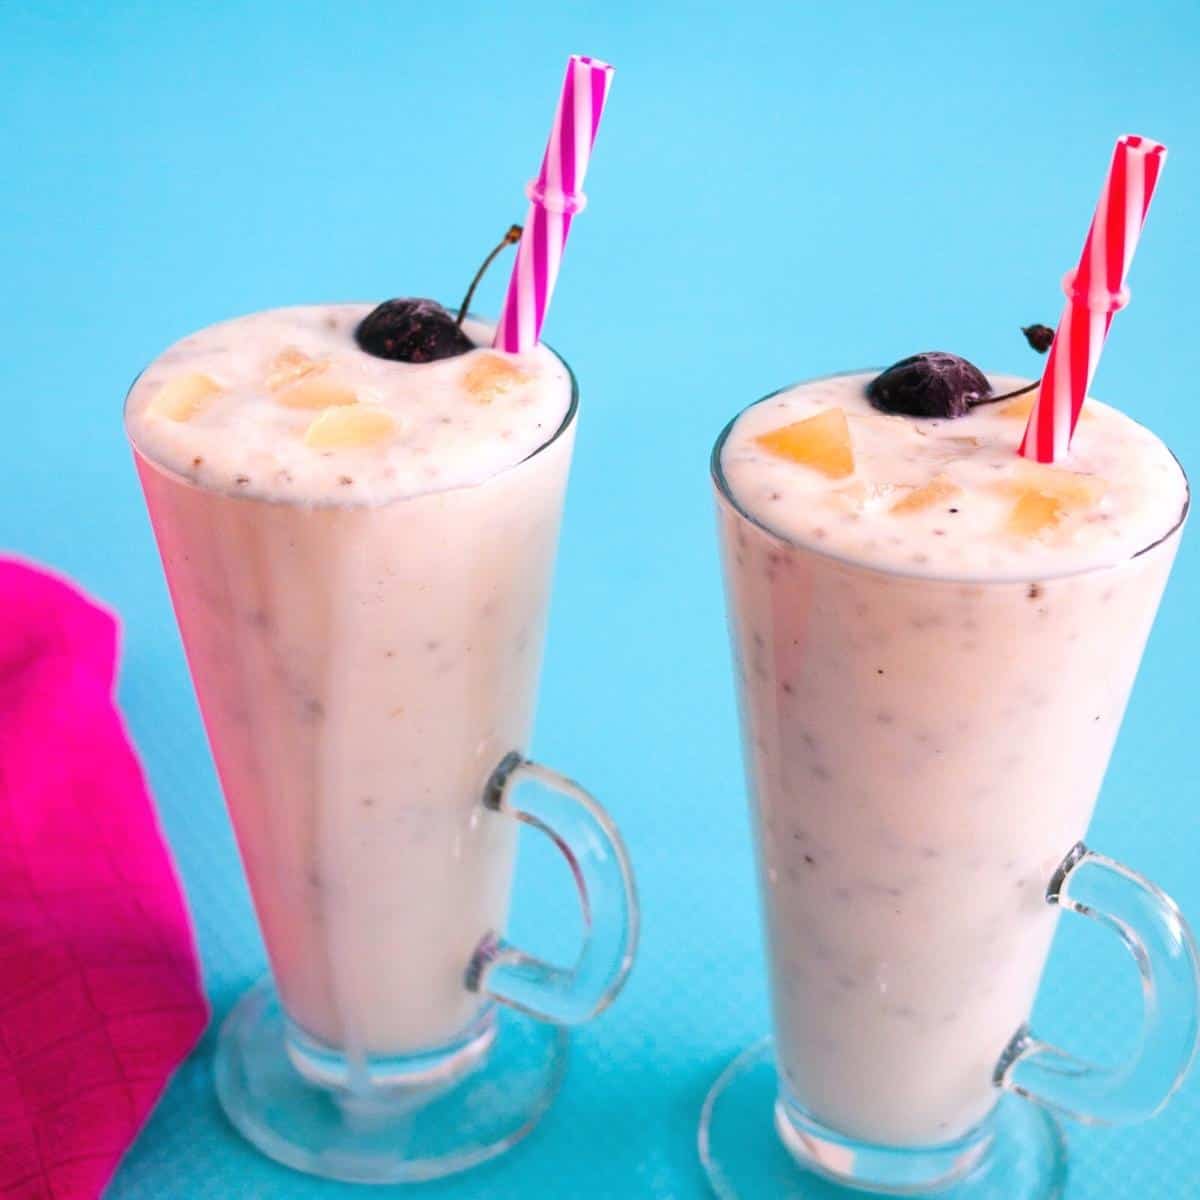 Two glasses filled with pina colada smoothie